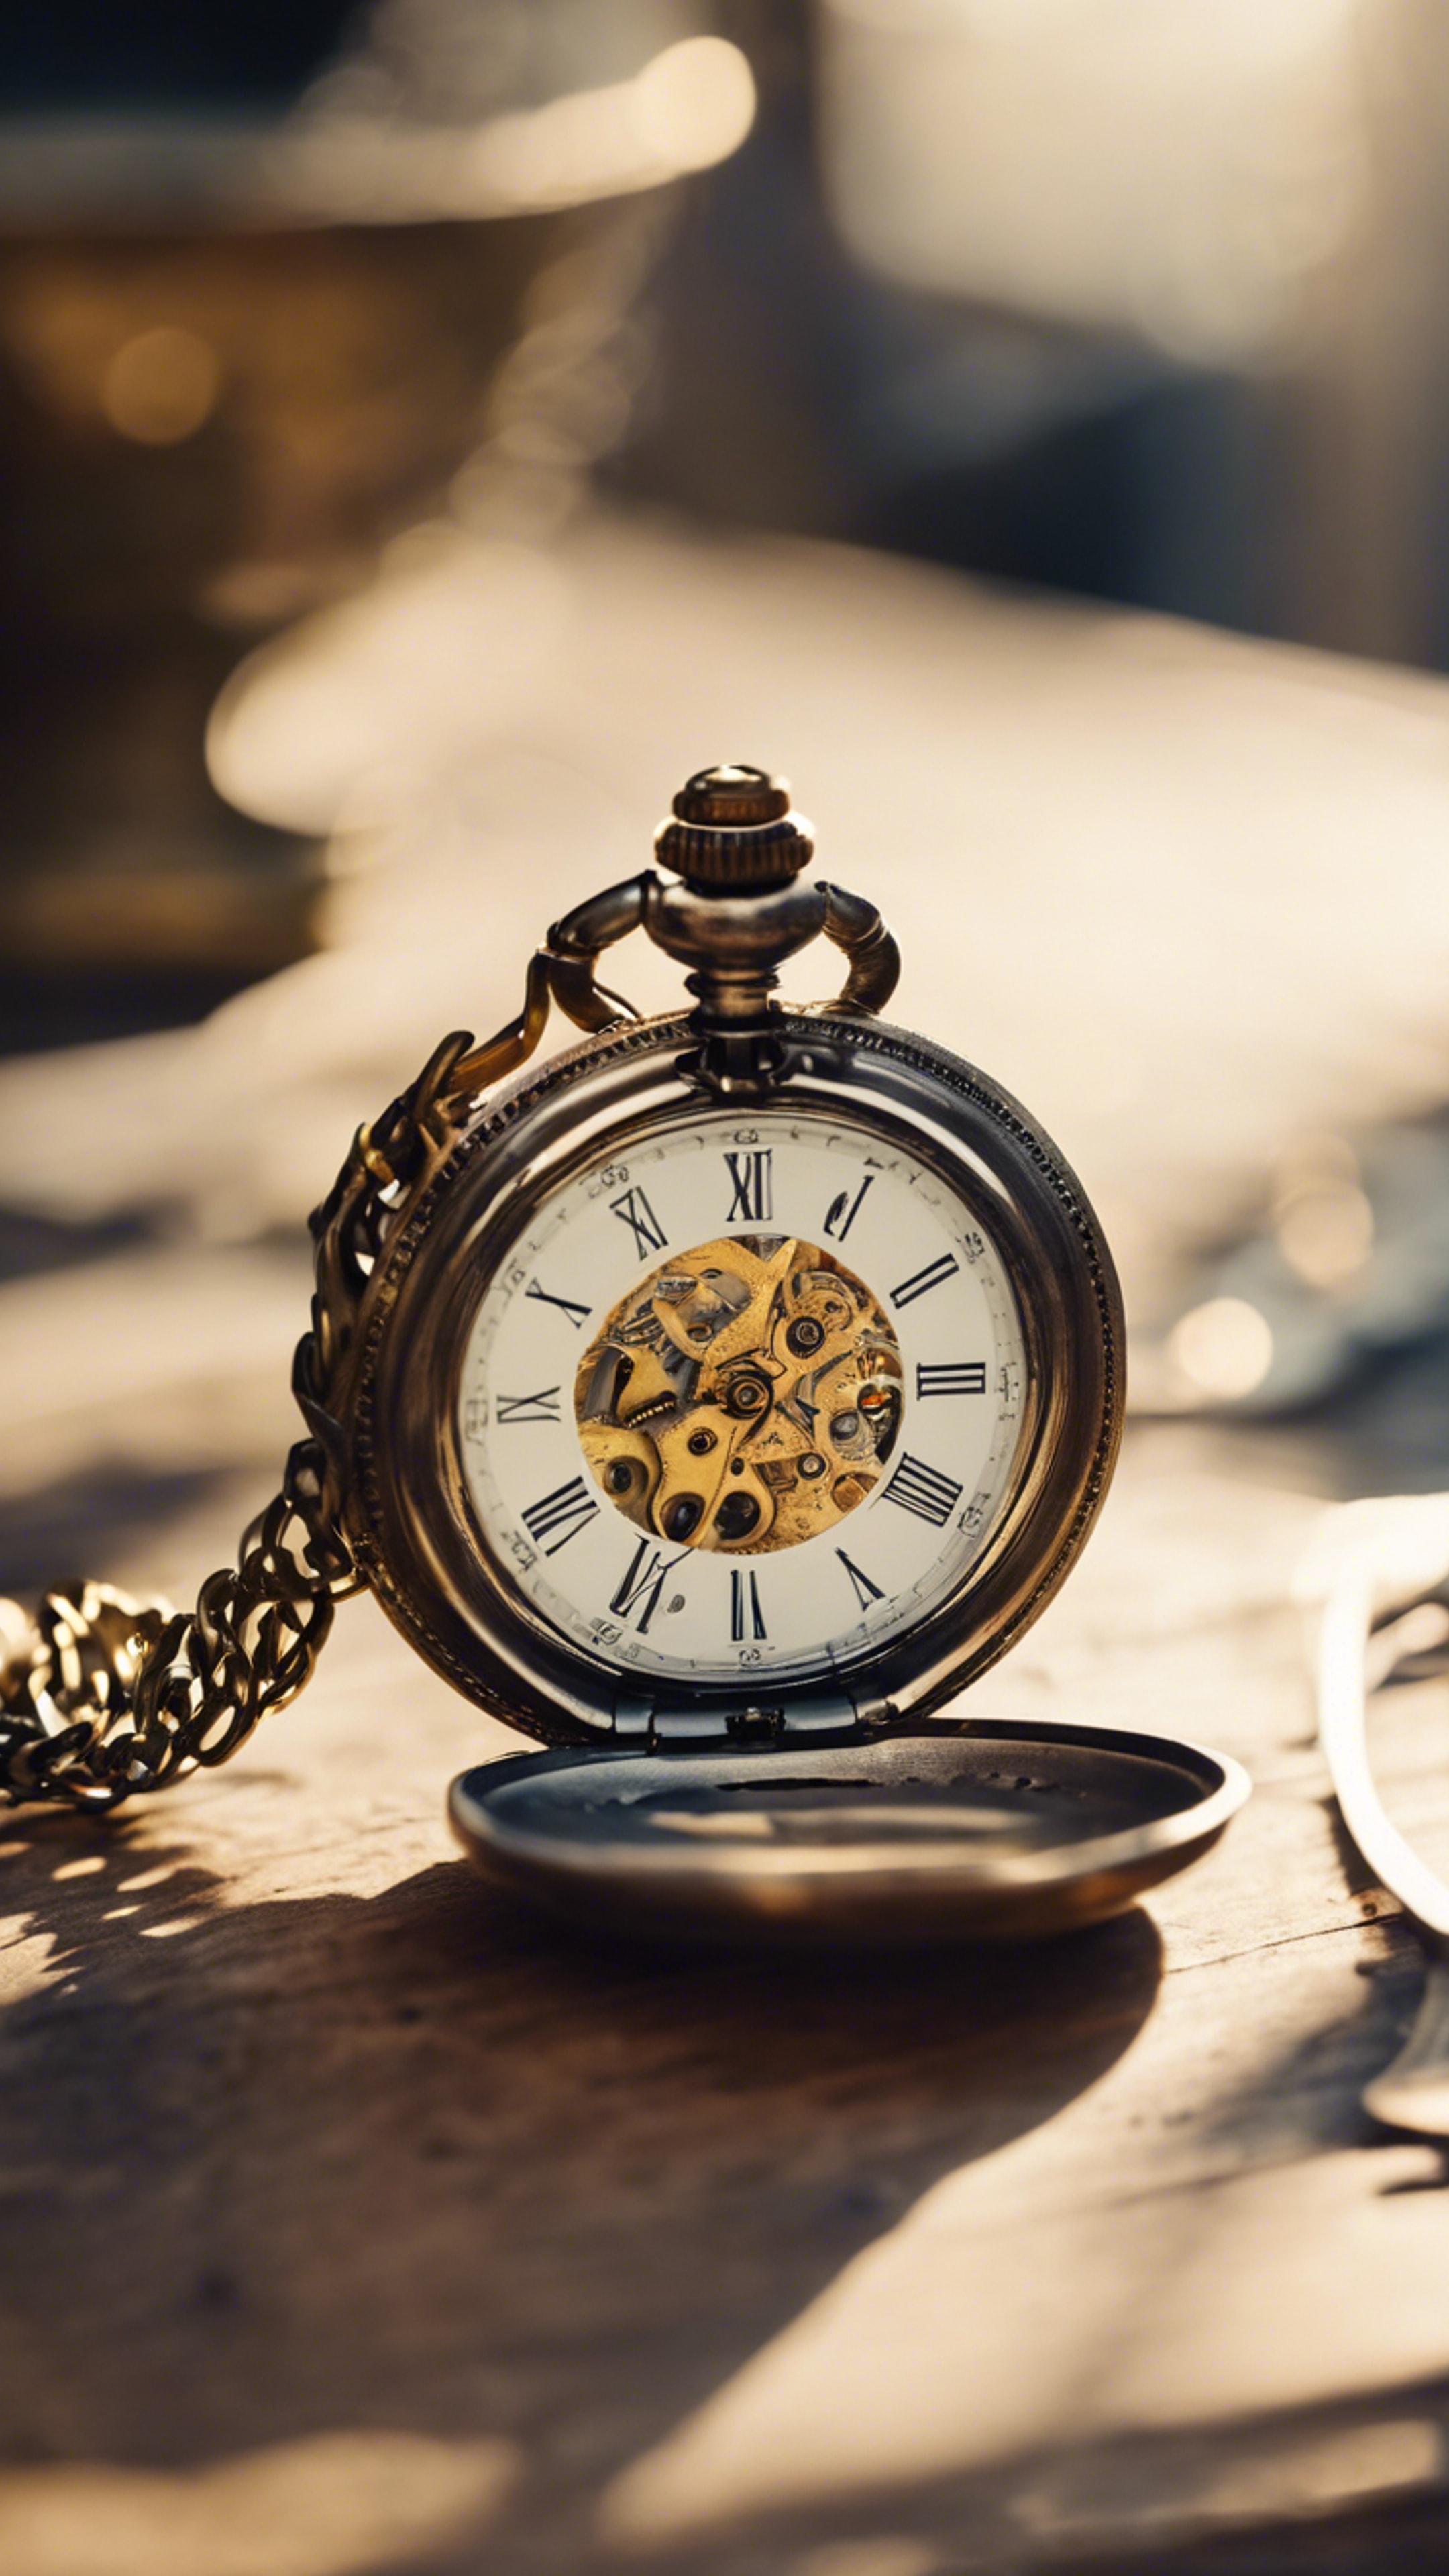 A vintage pocket watch, lying open on an antique table, reflecting the golden rays of afternoon sun. Tapeta[0f0622e1f4f2468db79b]